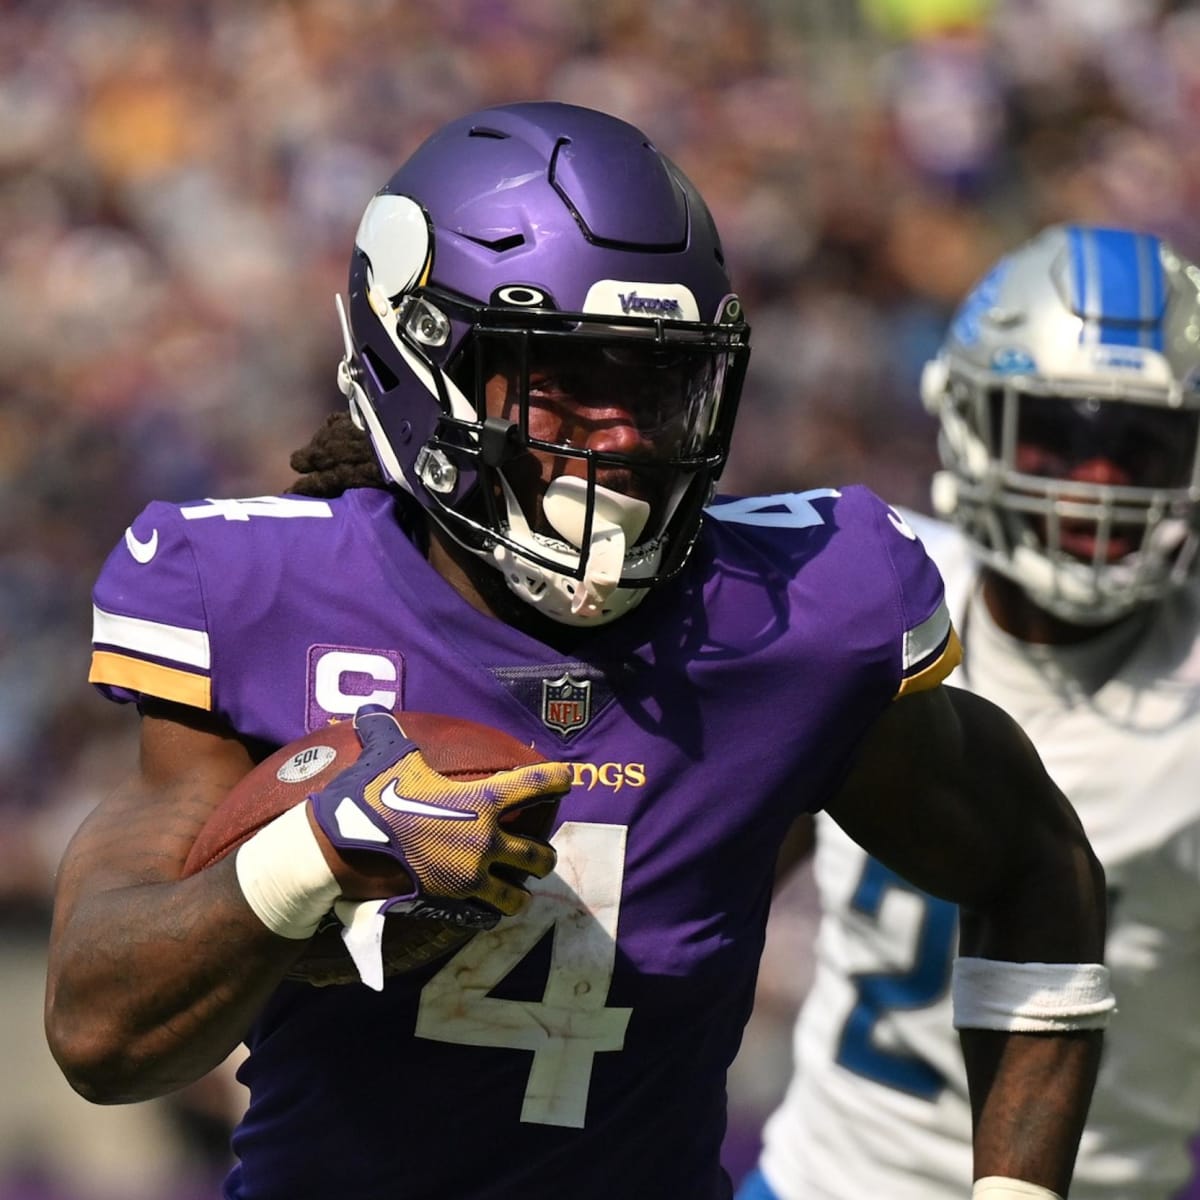 Why the Vikings (likely) haven't released RB Dalvin Cook yet